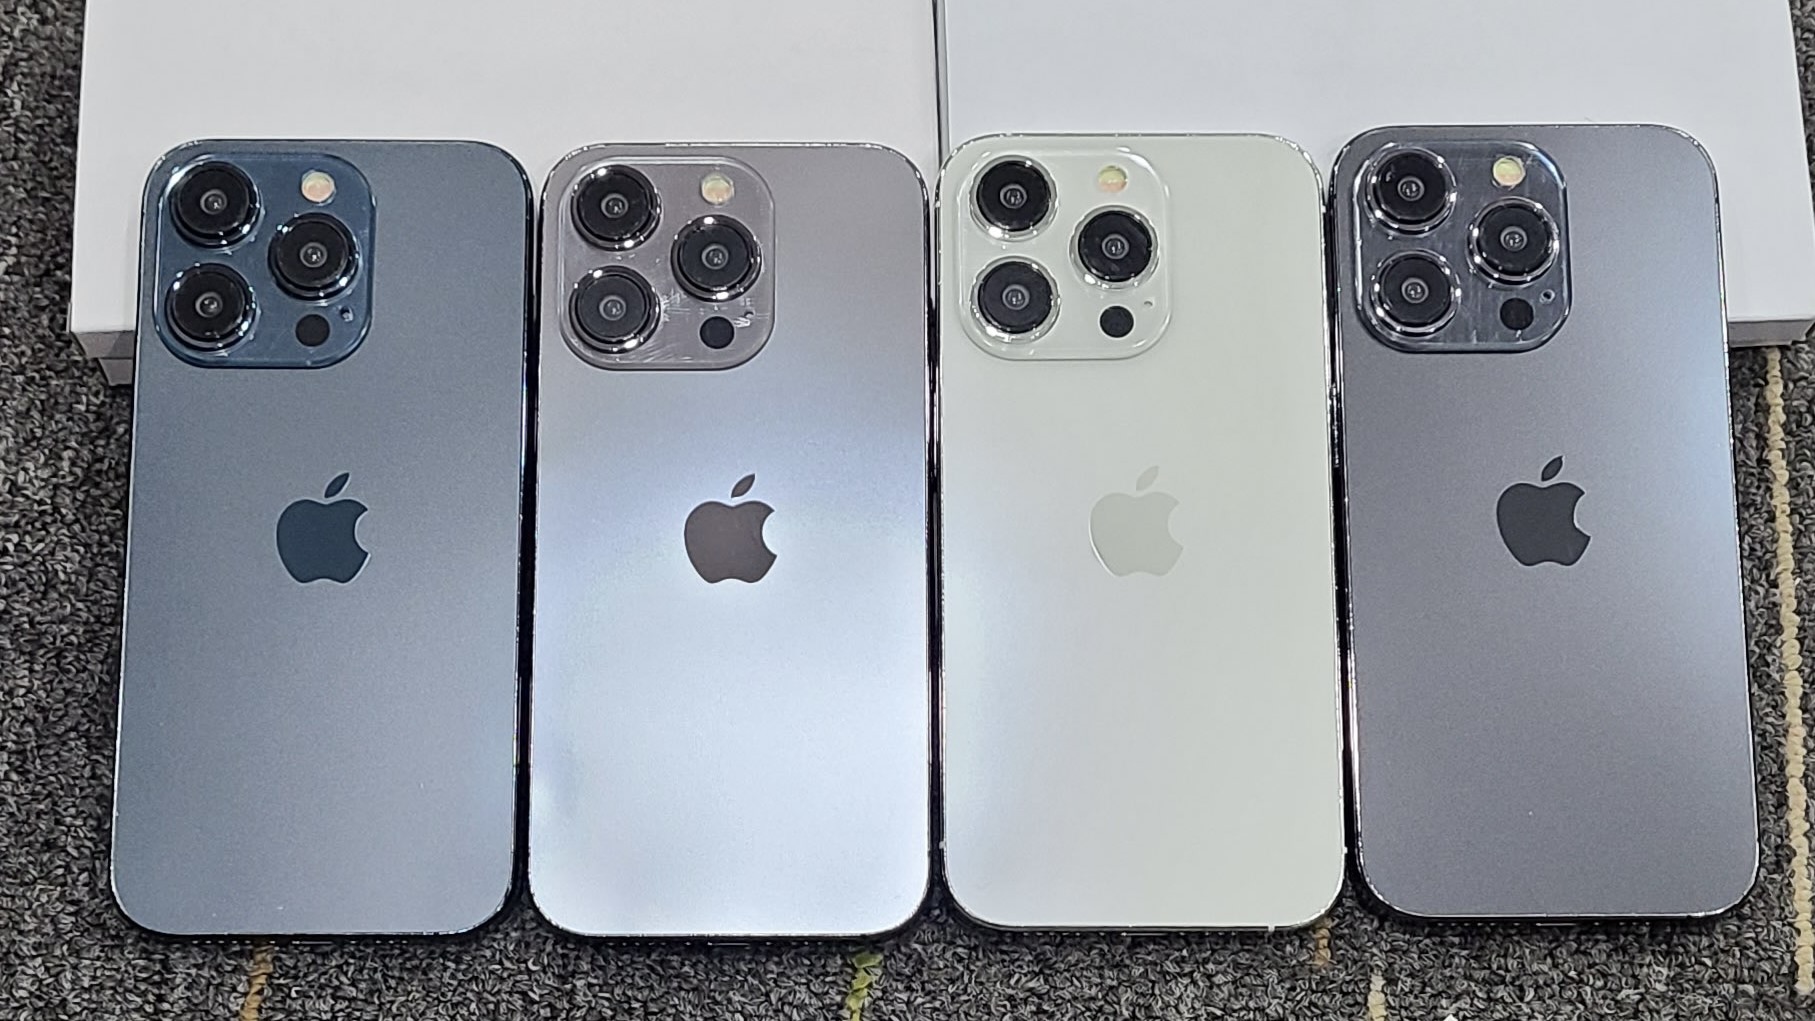 iPhone 15 colors: every rumored shade, including the 15 Pro and 15 Pro Max